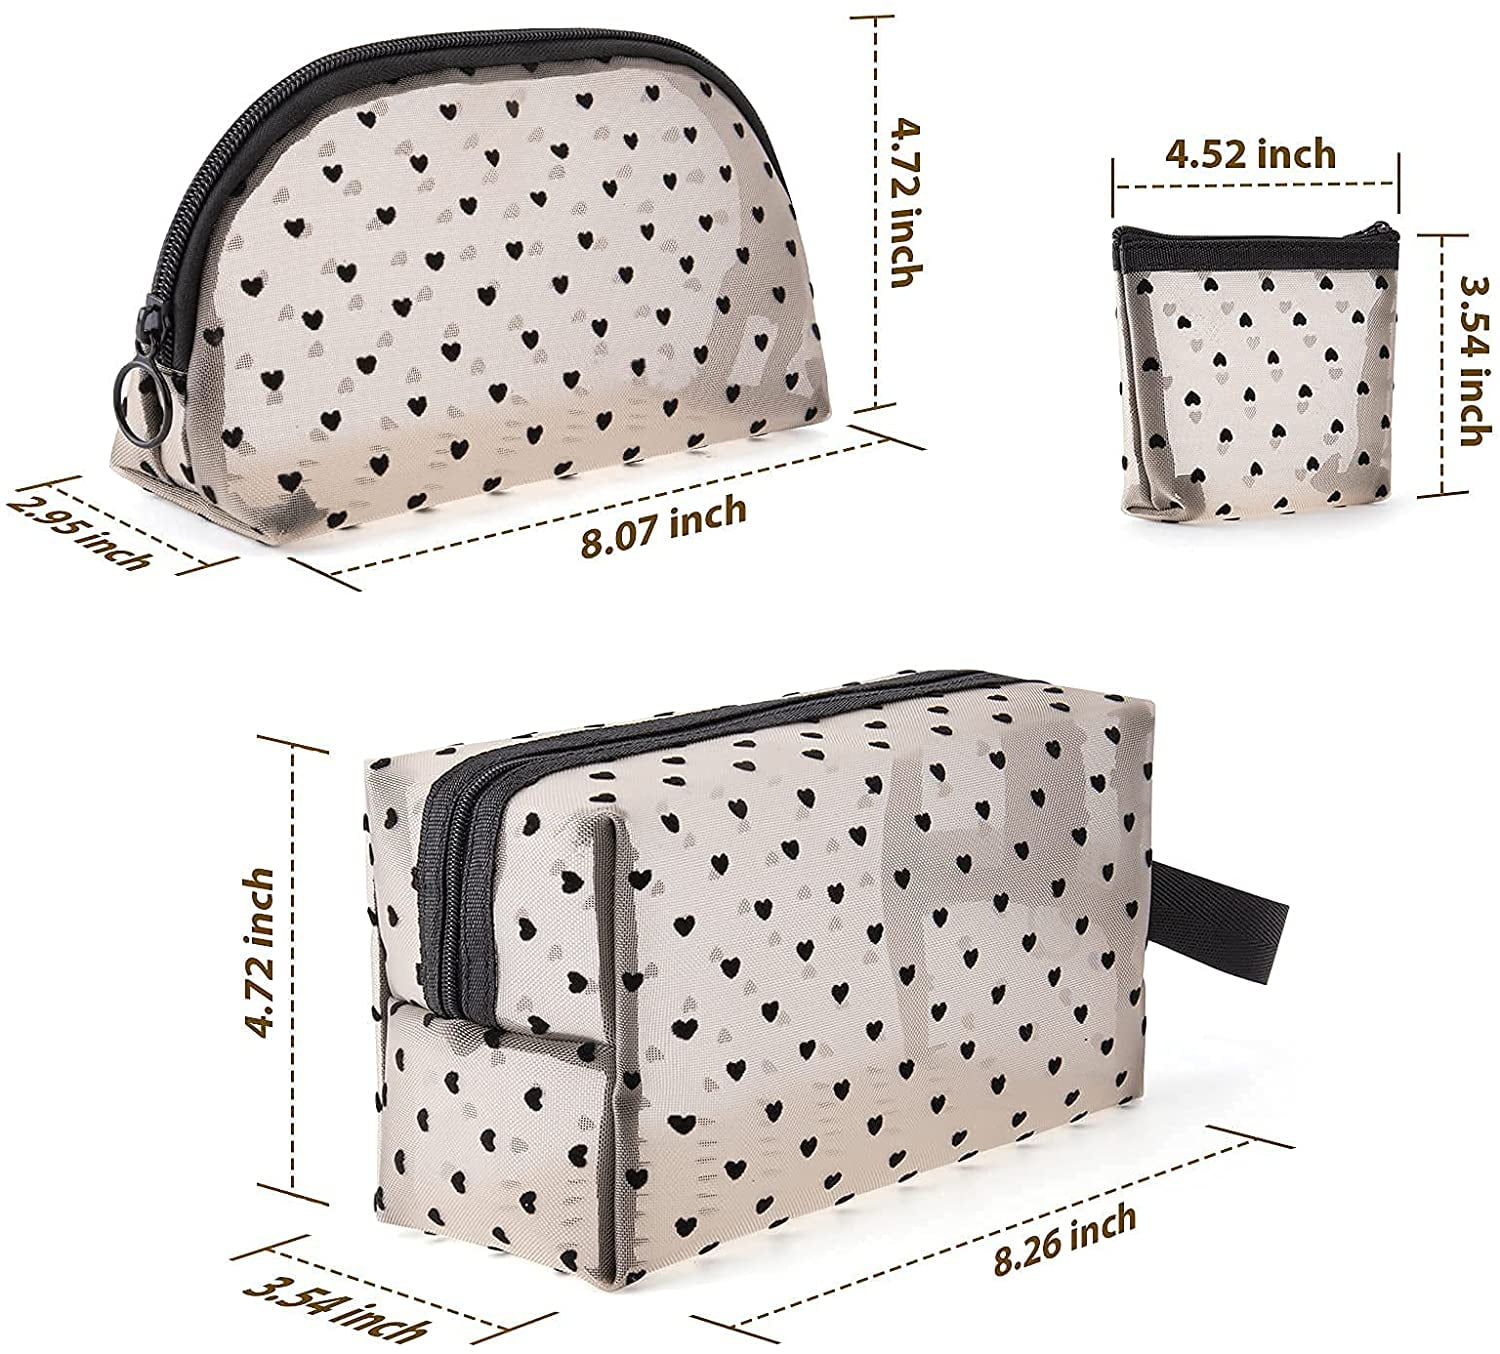 Lwithszg Small Makeup Bag, Makeup Pouch, Travel Cosmetic Organizer for Women and Girls Travel Makeup Bag Toiletry Bag Travel Organizer for Accessories